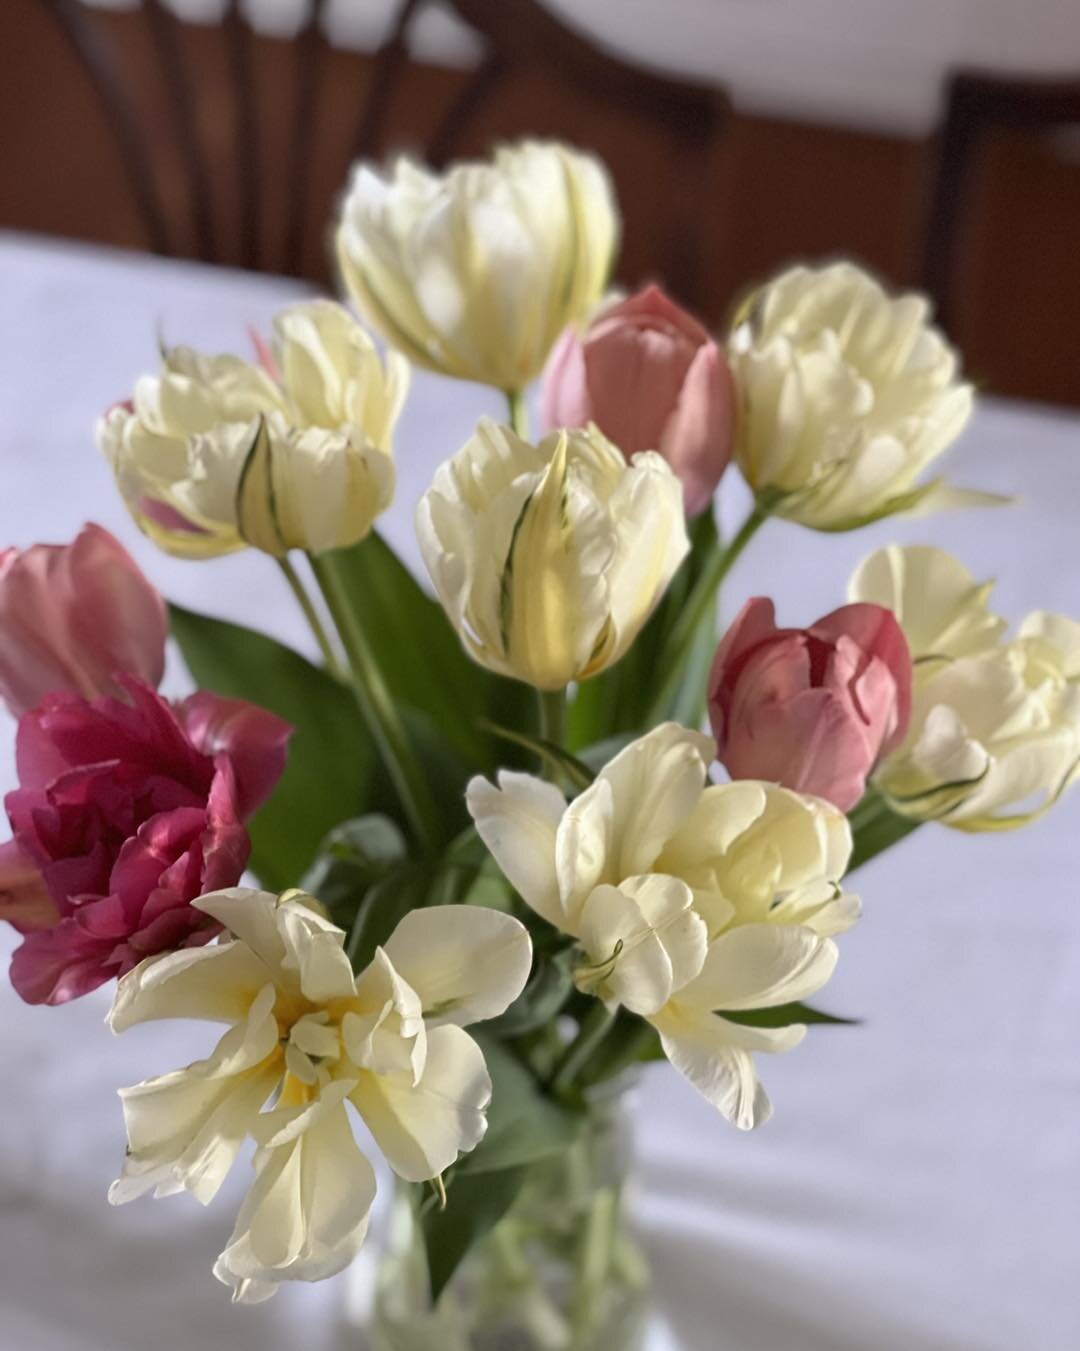 Lovely photos from a lovely sister in law! 💜

#flowers #kennewickwa #flowerart #tulips #exoticemporertulips #sisterinlawlove #heirloomnar #narcissus #narcissusflower